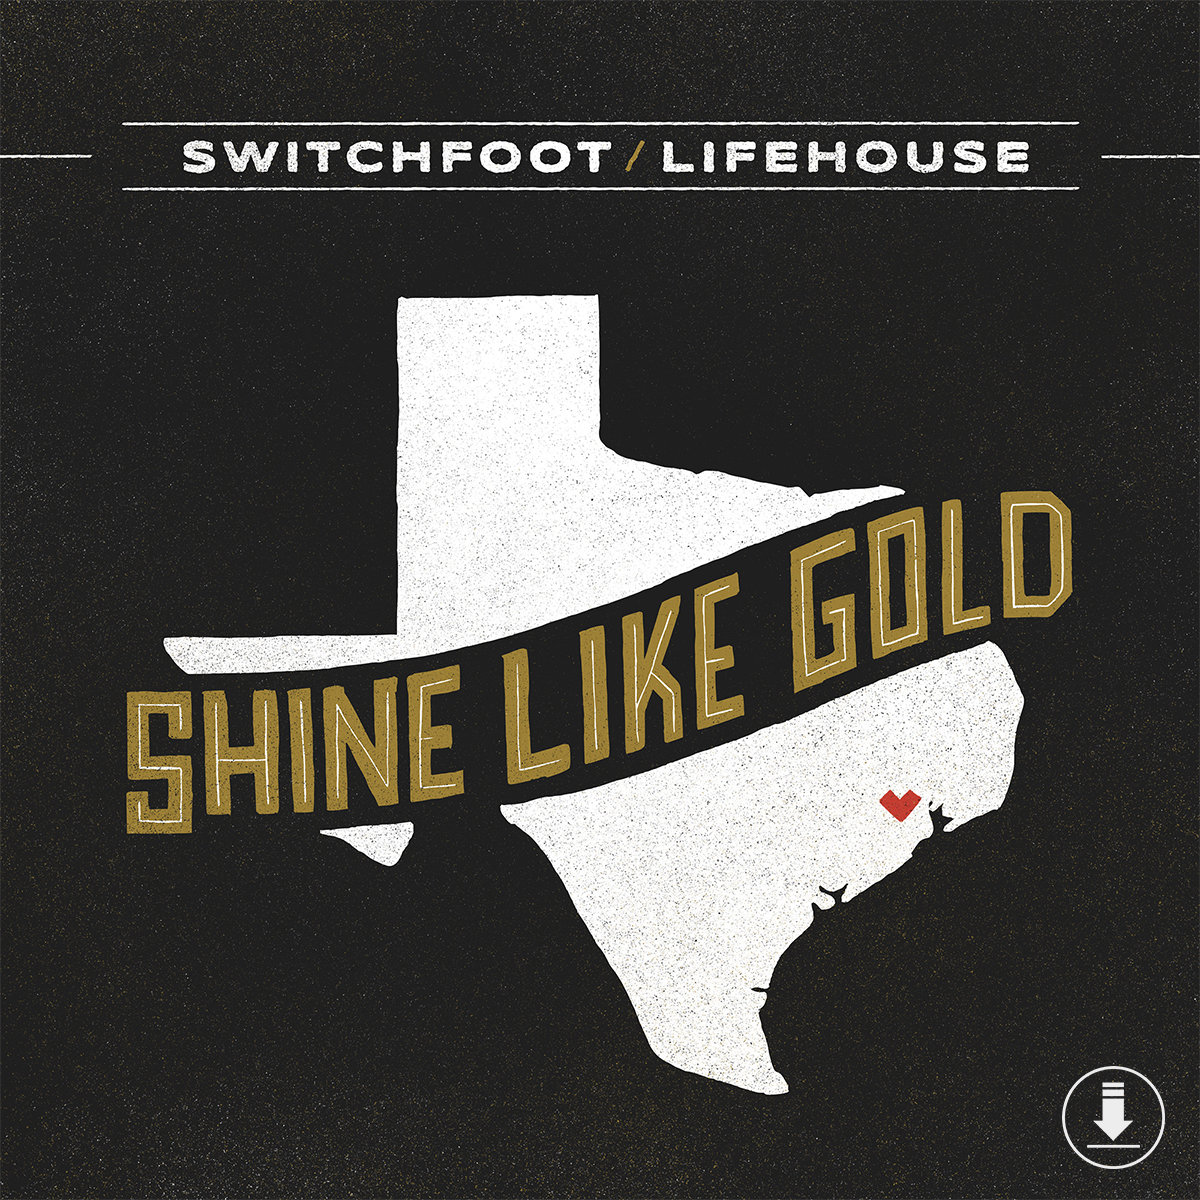 Switchfoot & Lifehouse Release New Song 'Shine Like Gold' In Aid Of Hurricane Harvey Relief